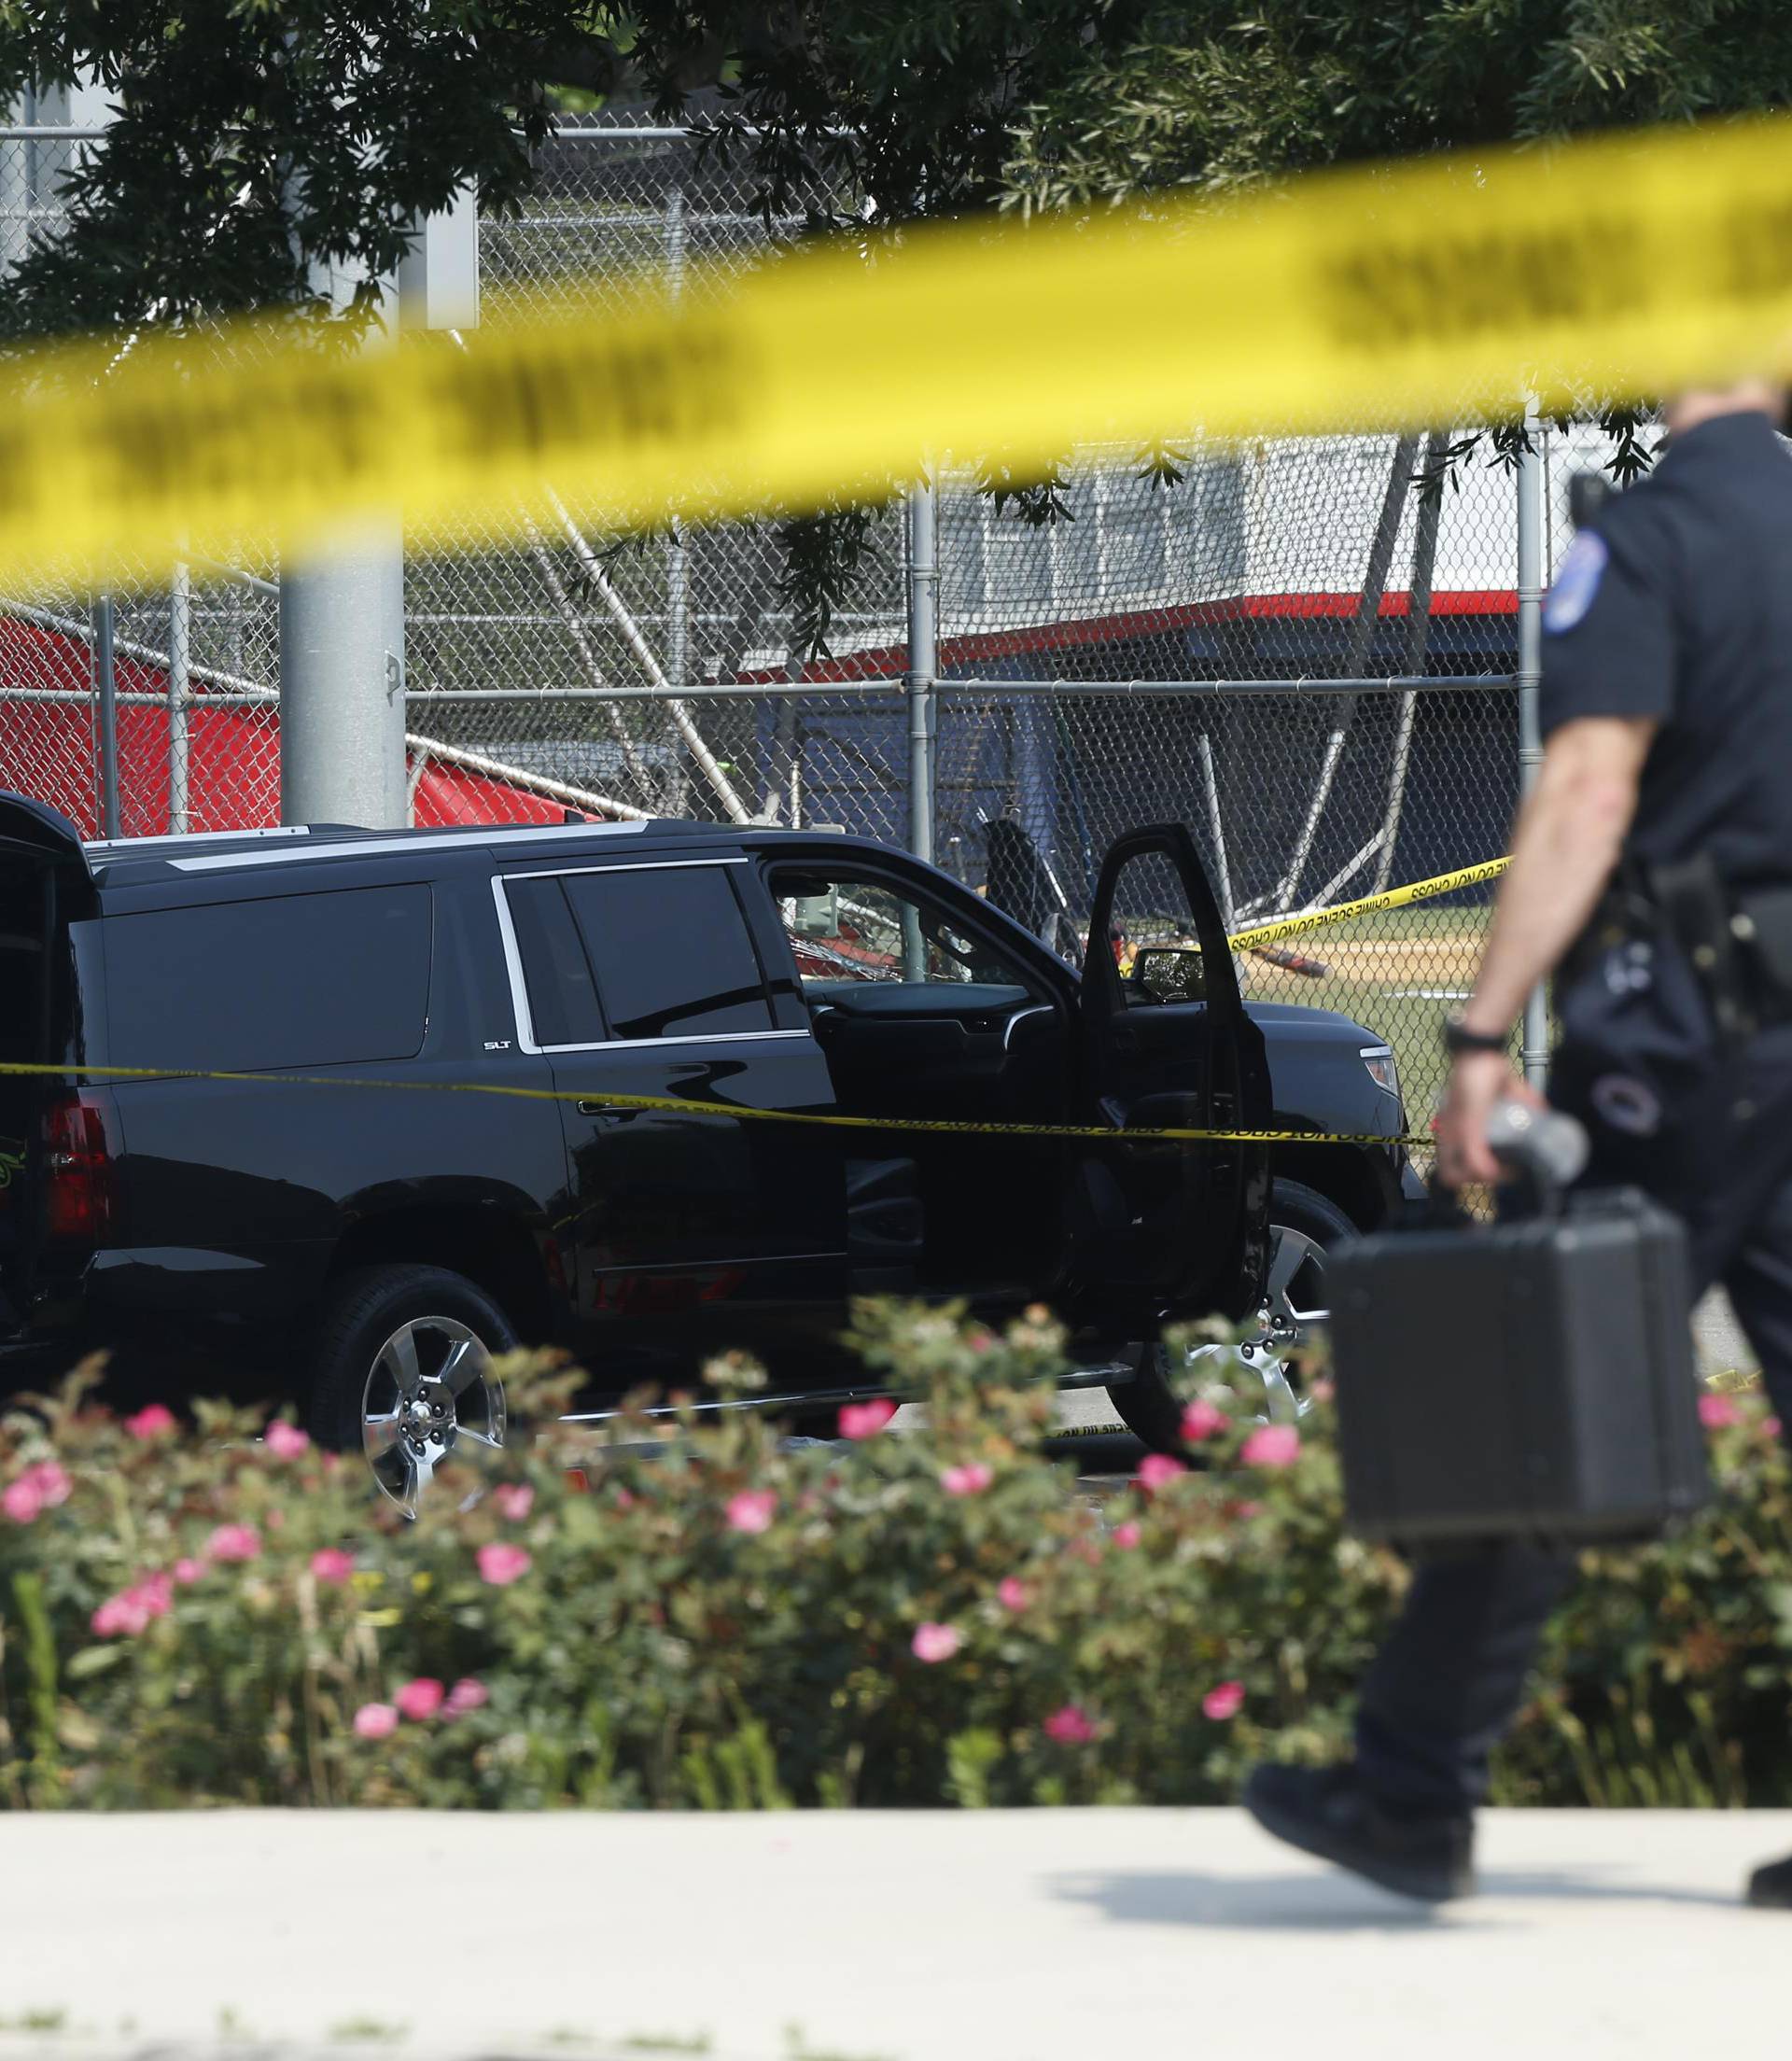 Police investigate shooting scene after a gunman opened fire on Republican members of Congress during a baseball practice near Washington in Alexandria, Virginia